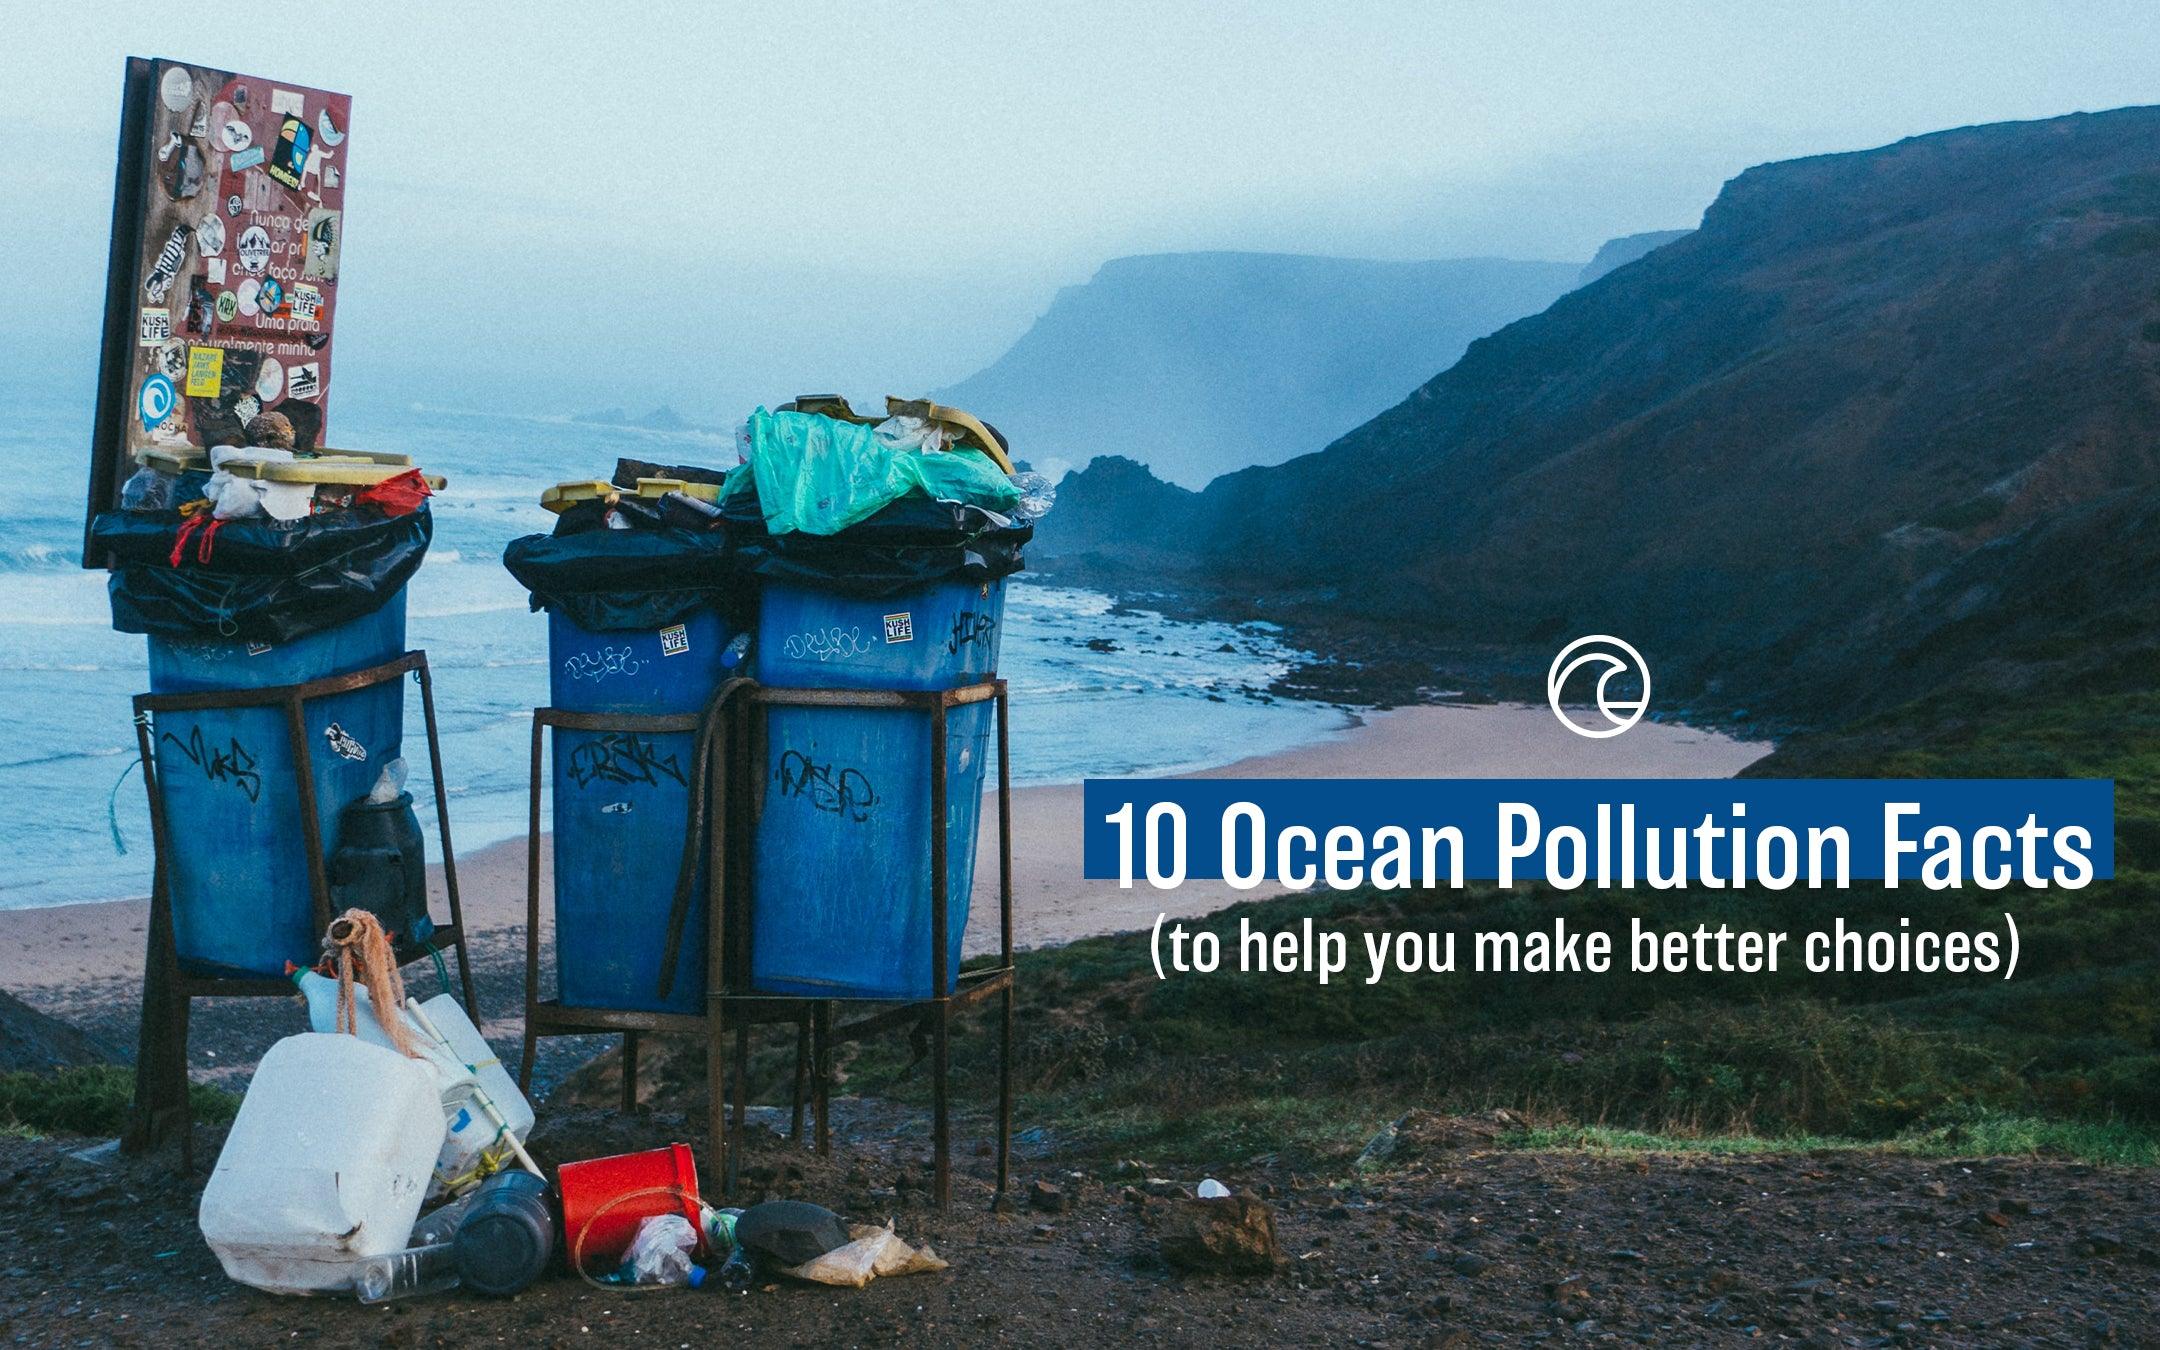 10 OCEAN POLLUTION FACTS TO HELP YOU MAKE BETTER CHOICES - Cape Clasp